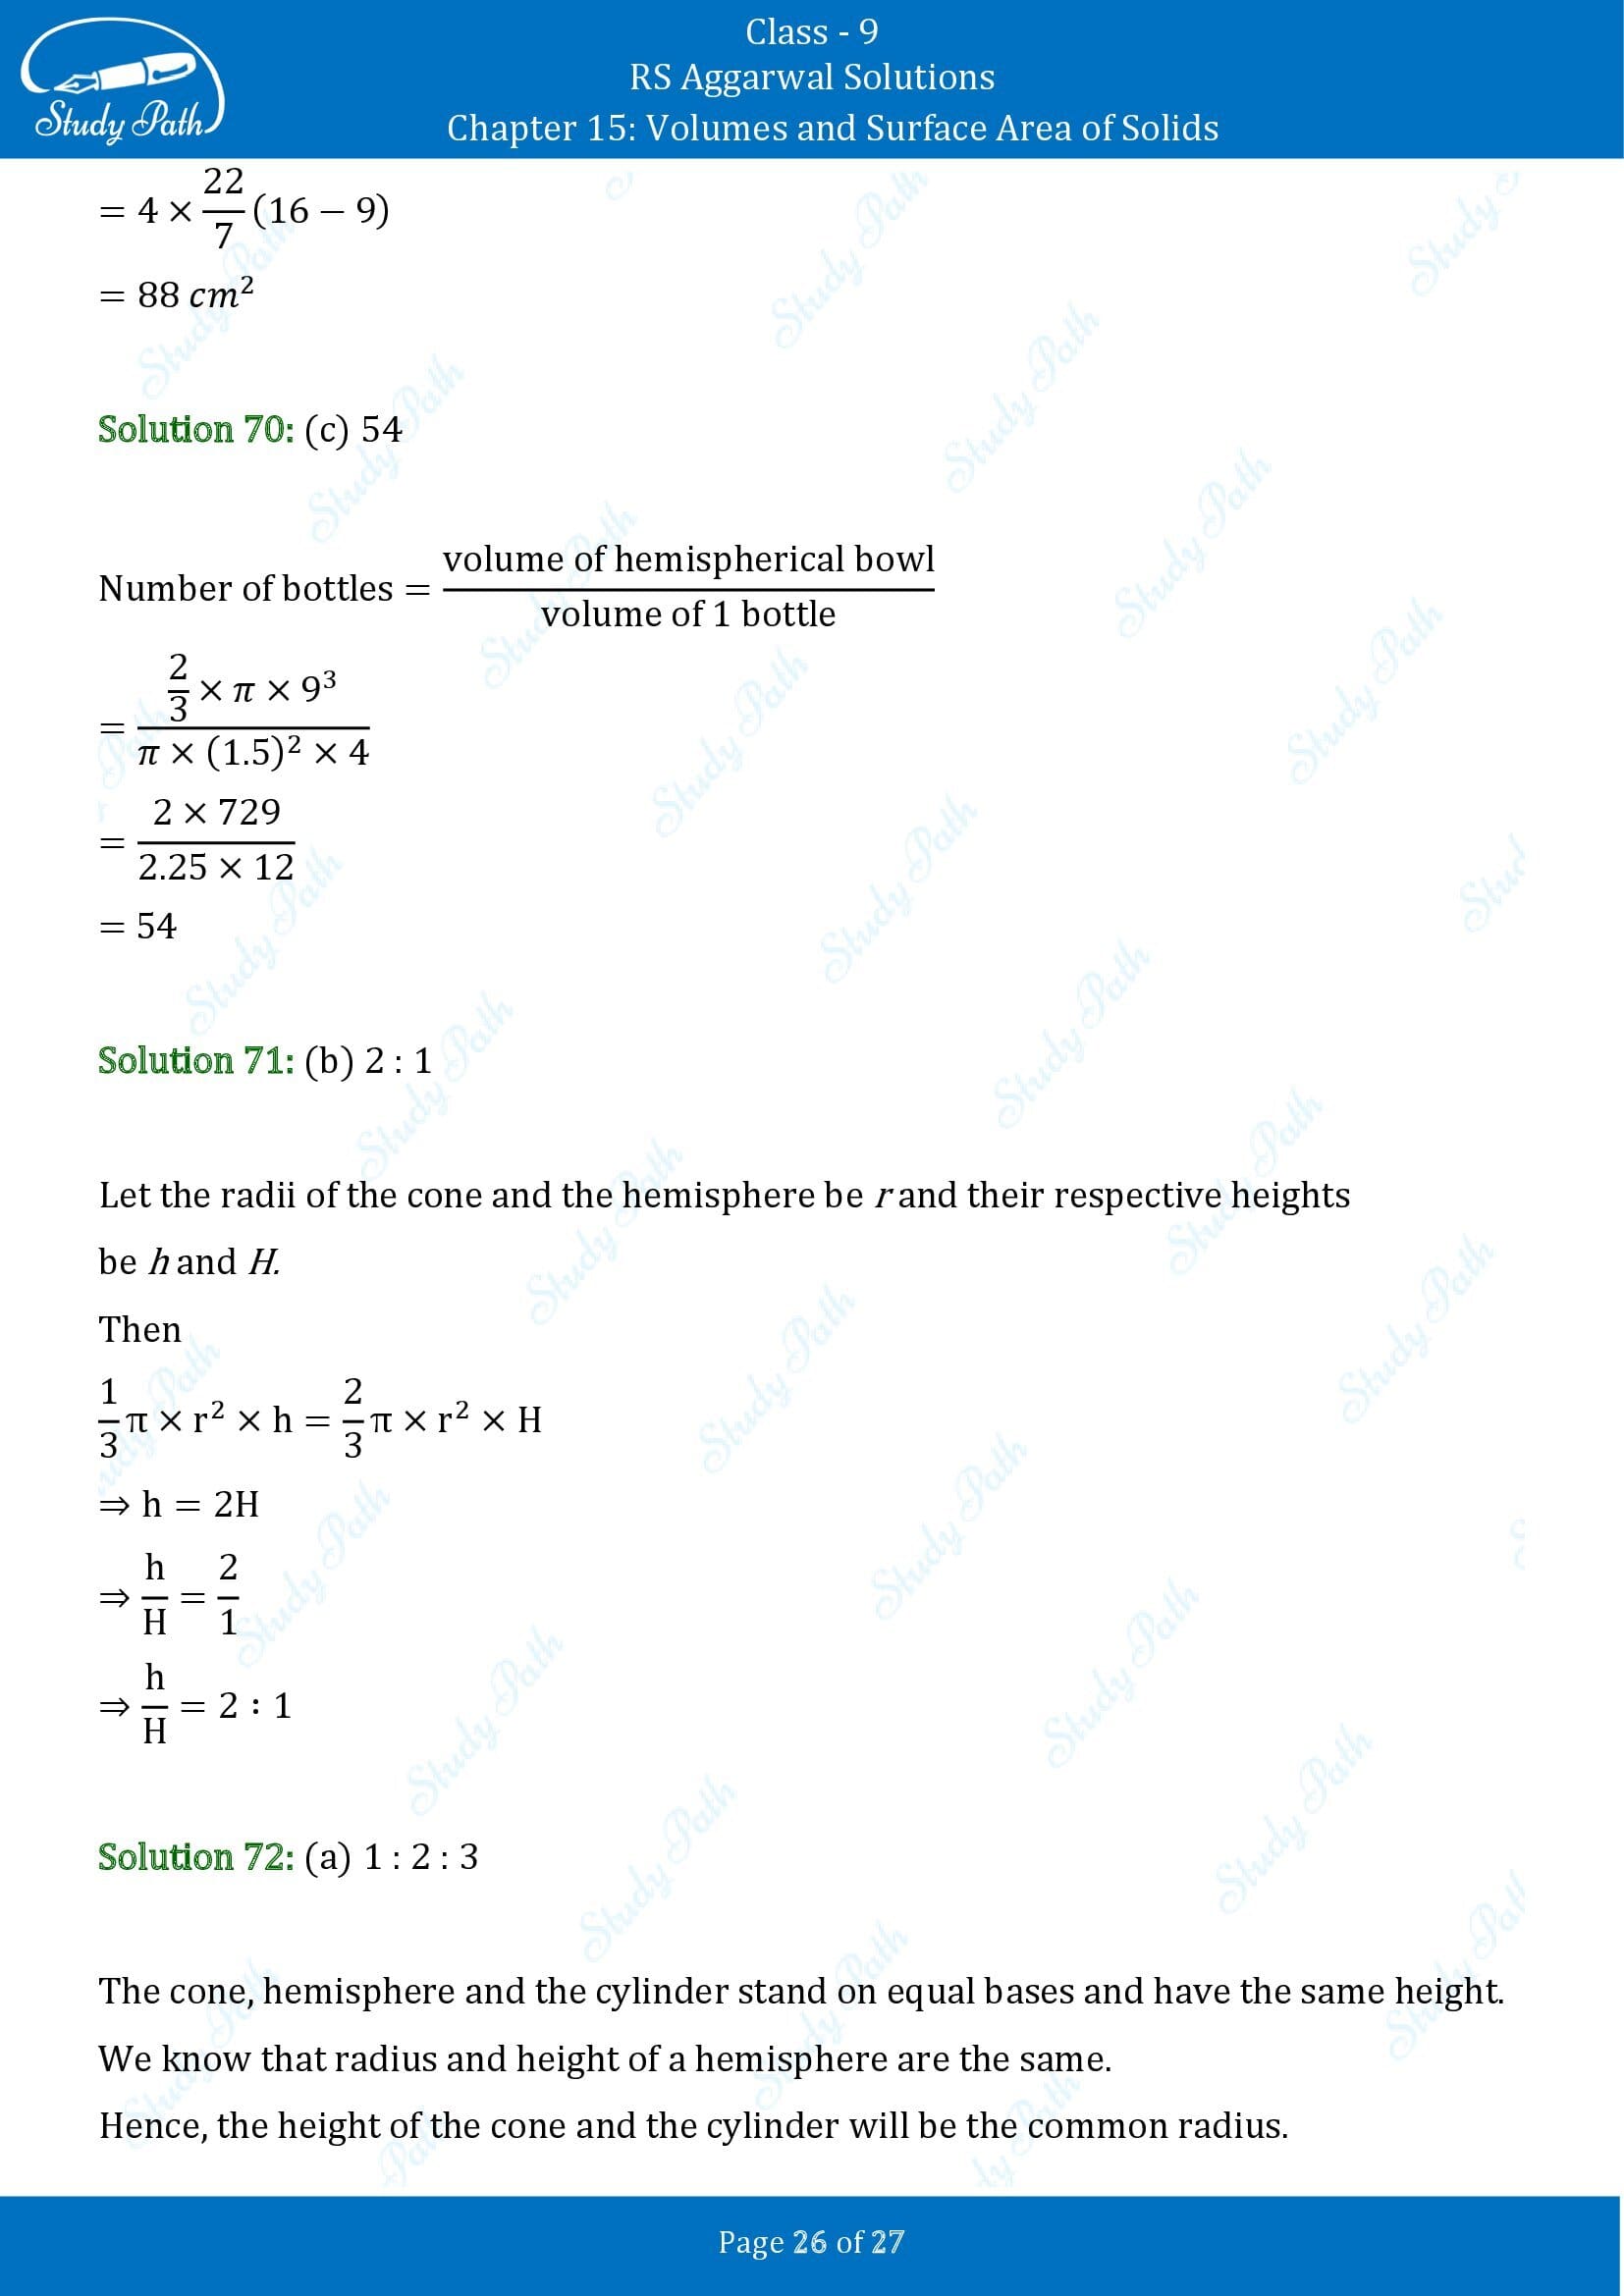 RS Aggarwal Solutions Class 9 Chapter 15 Volumes and Surface Area of Solids Multiple Choice Questions MCQs 00026